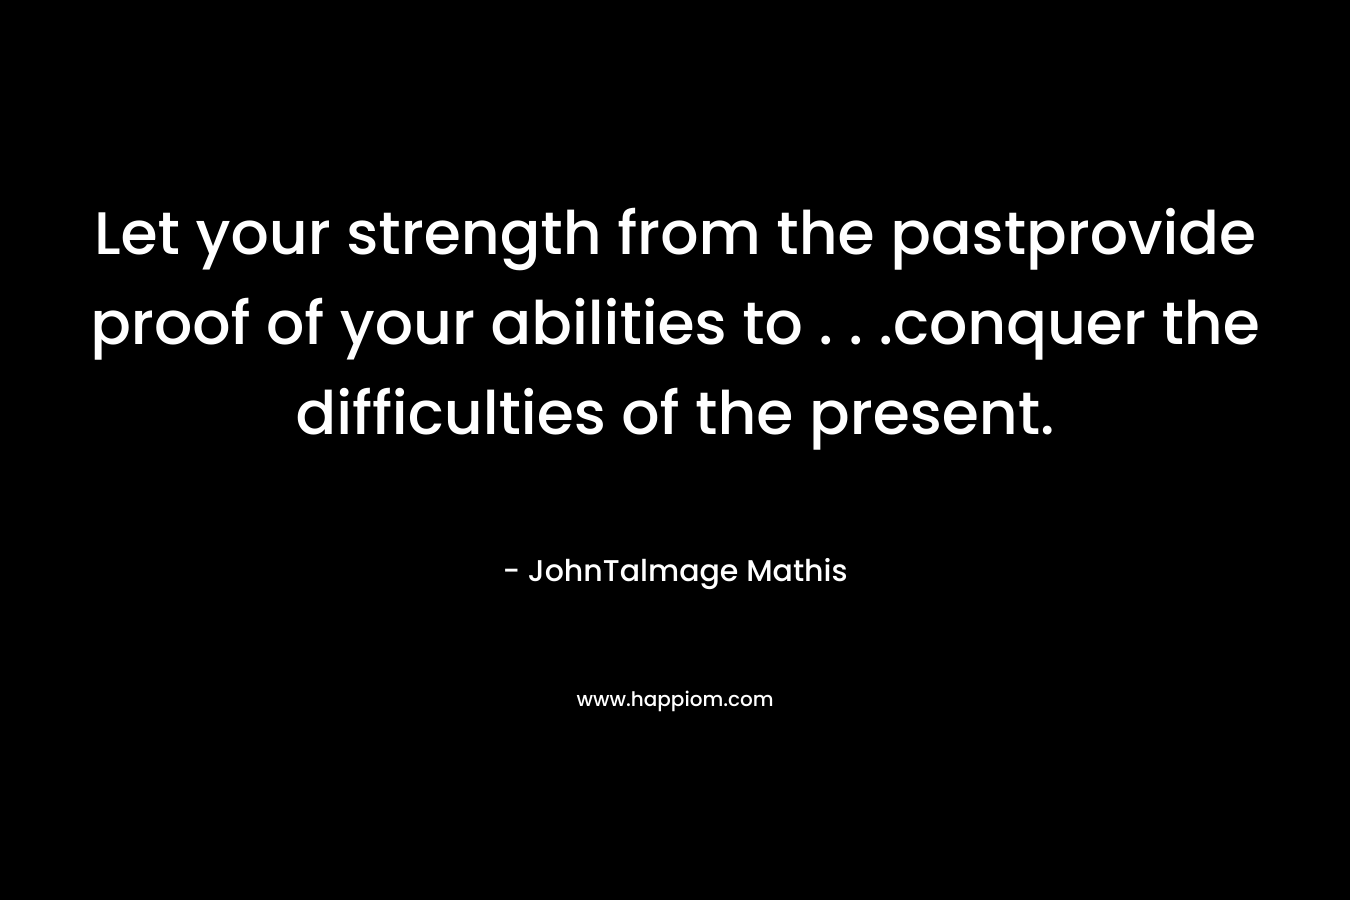 Let your strength from the pastprovide proof of your abilities to . . .conquer the difficulties of the present.